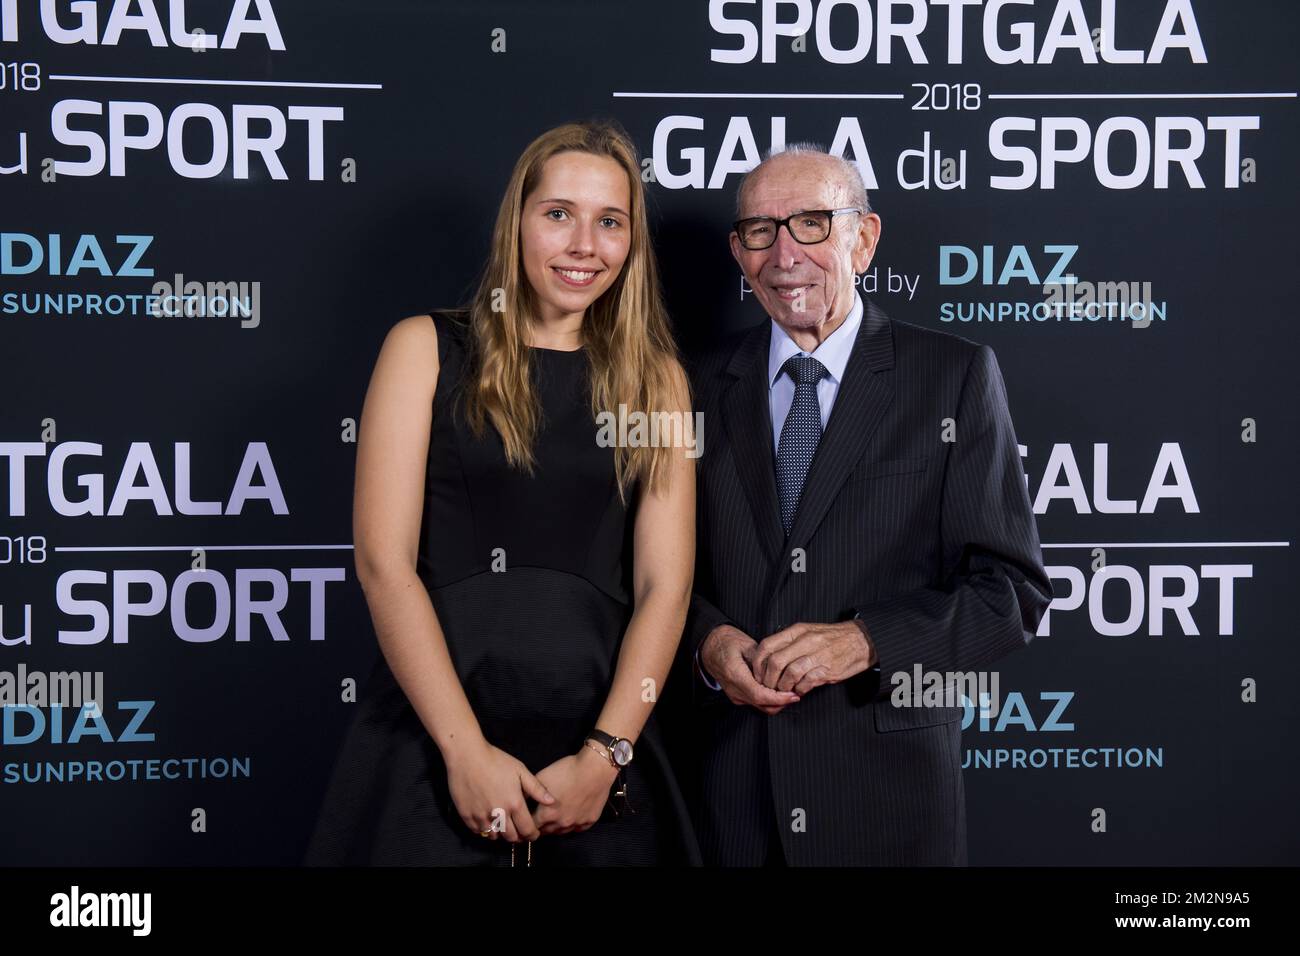 Roger Moens pictured on the red carpet during the gala evening for the sport women and men of the year 2018 awards, Saturday 22 December 2018, in Brussels. BELGA PHOTO LAURIE DIEFFEMBACQ-JASPER JACOBS-GREGORY VAN GANSEN-PHILIPPE CROCHET  Stock Photo